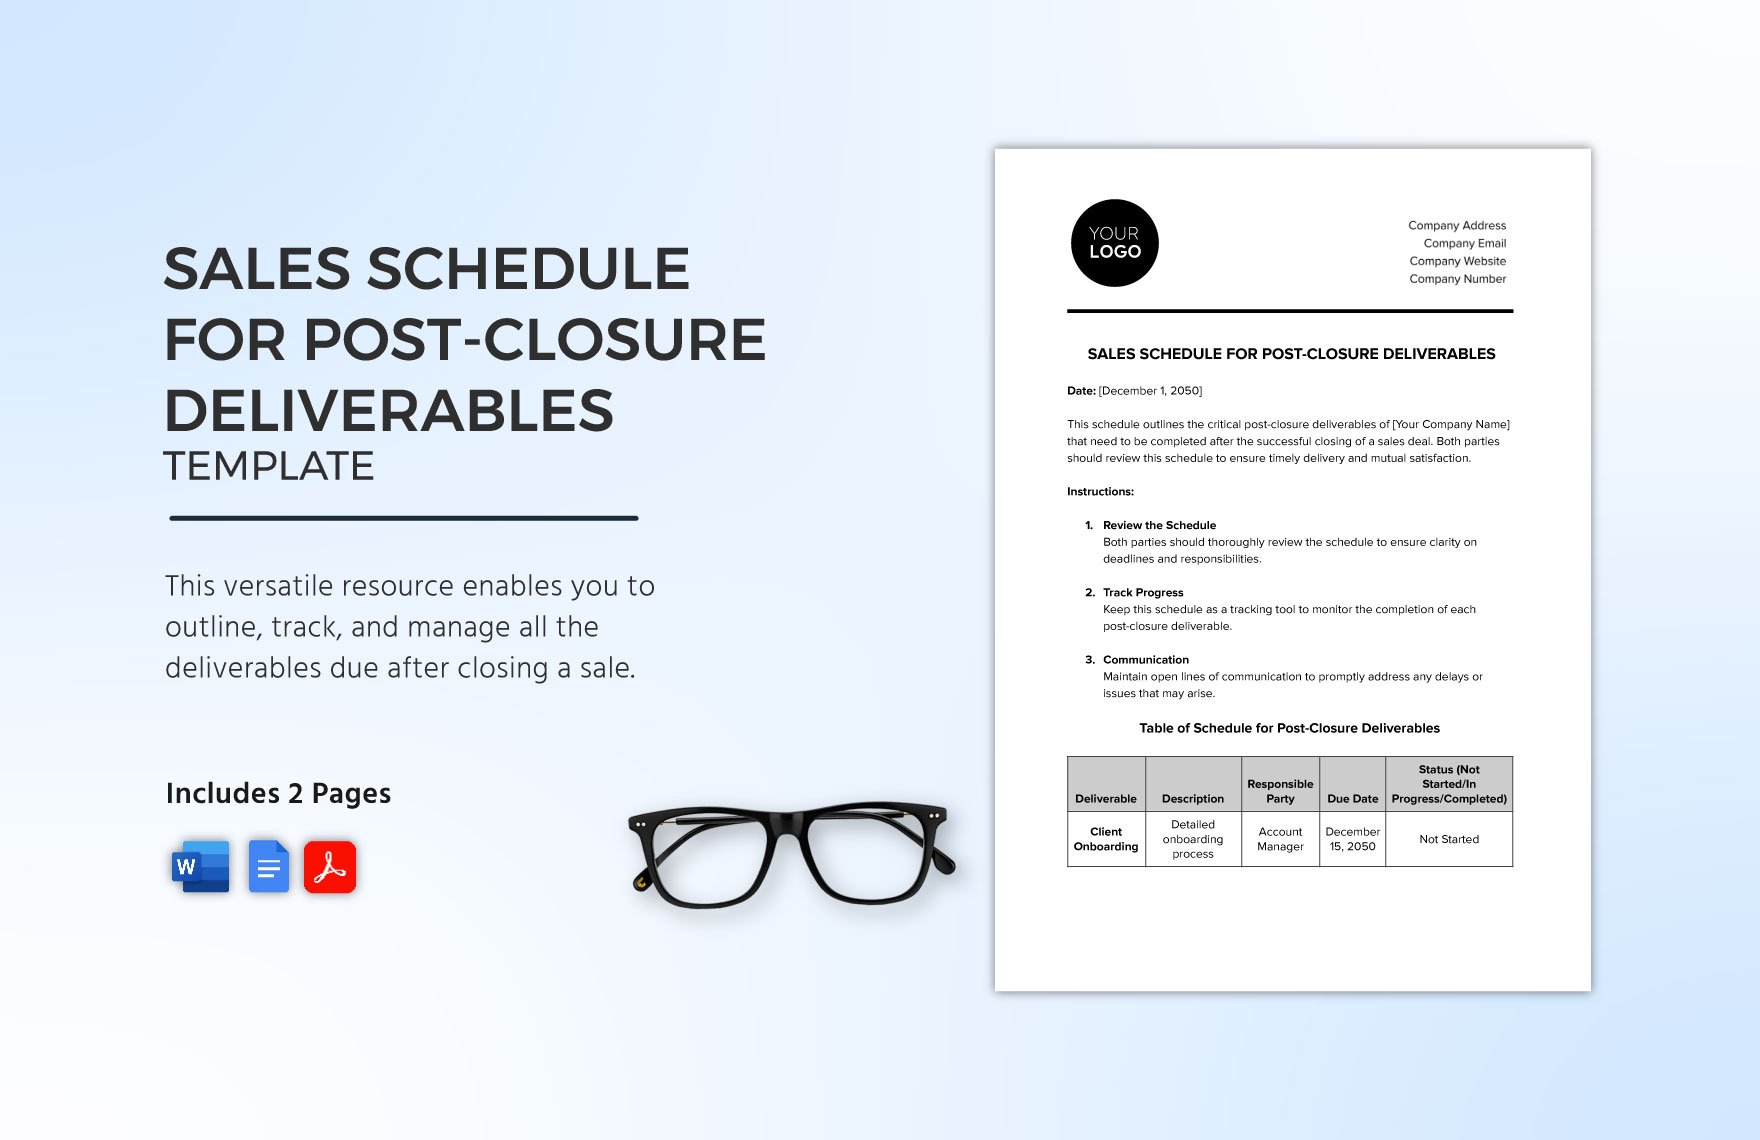 Sales Schedule for Post-Closure Deliverables Template in Word, Google Docs, PDF